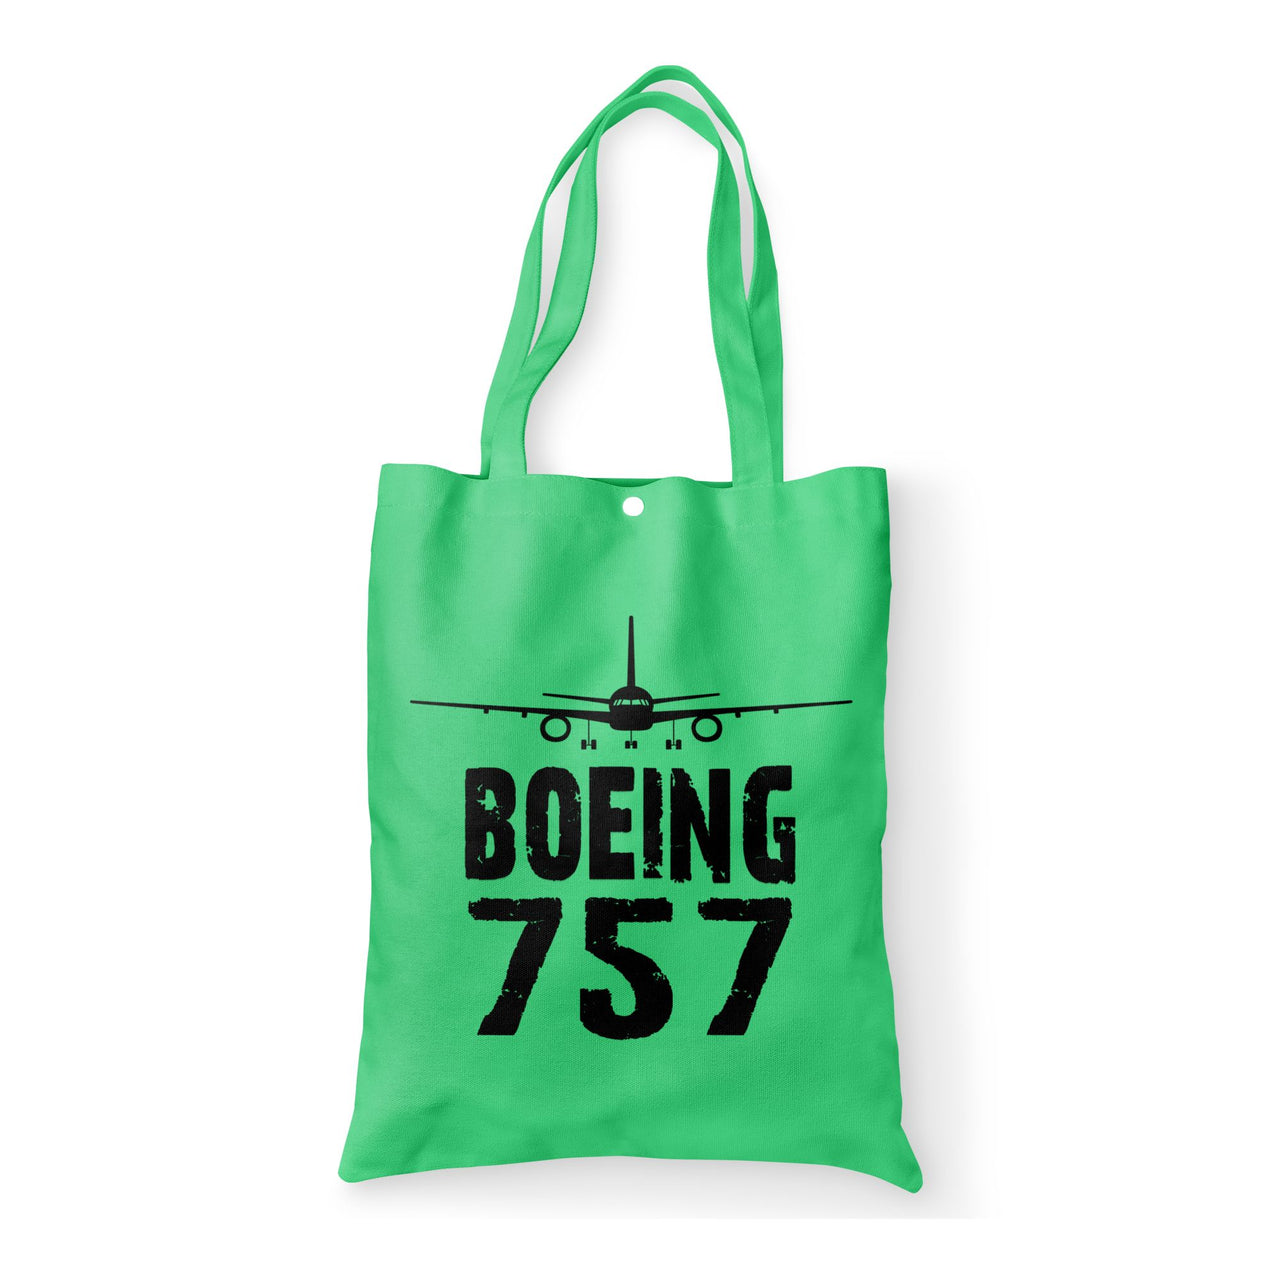 Boeing 757 & Plane Designed Tote Bags